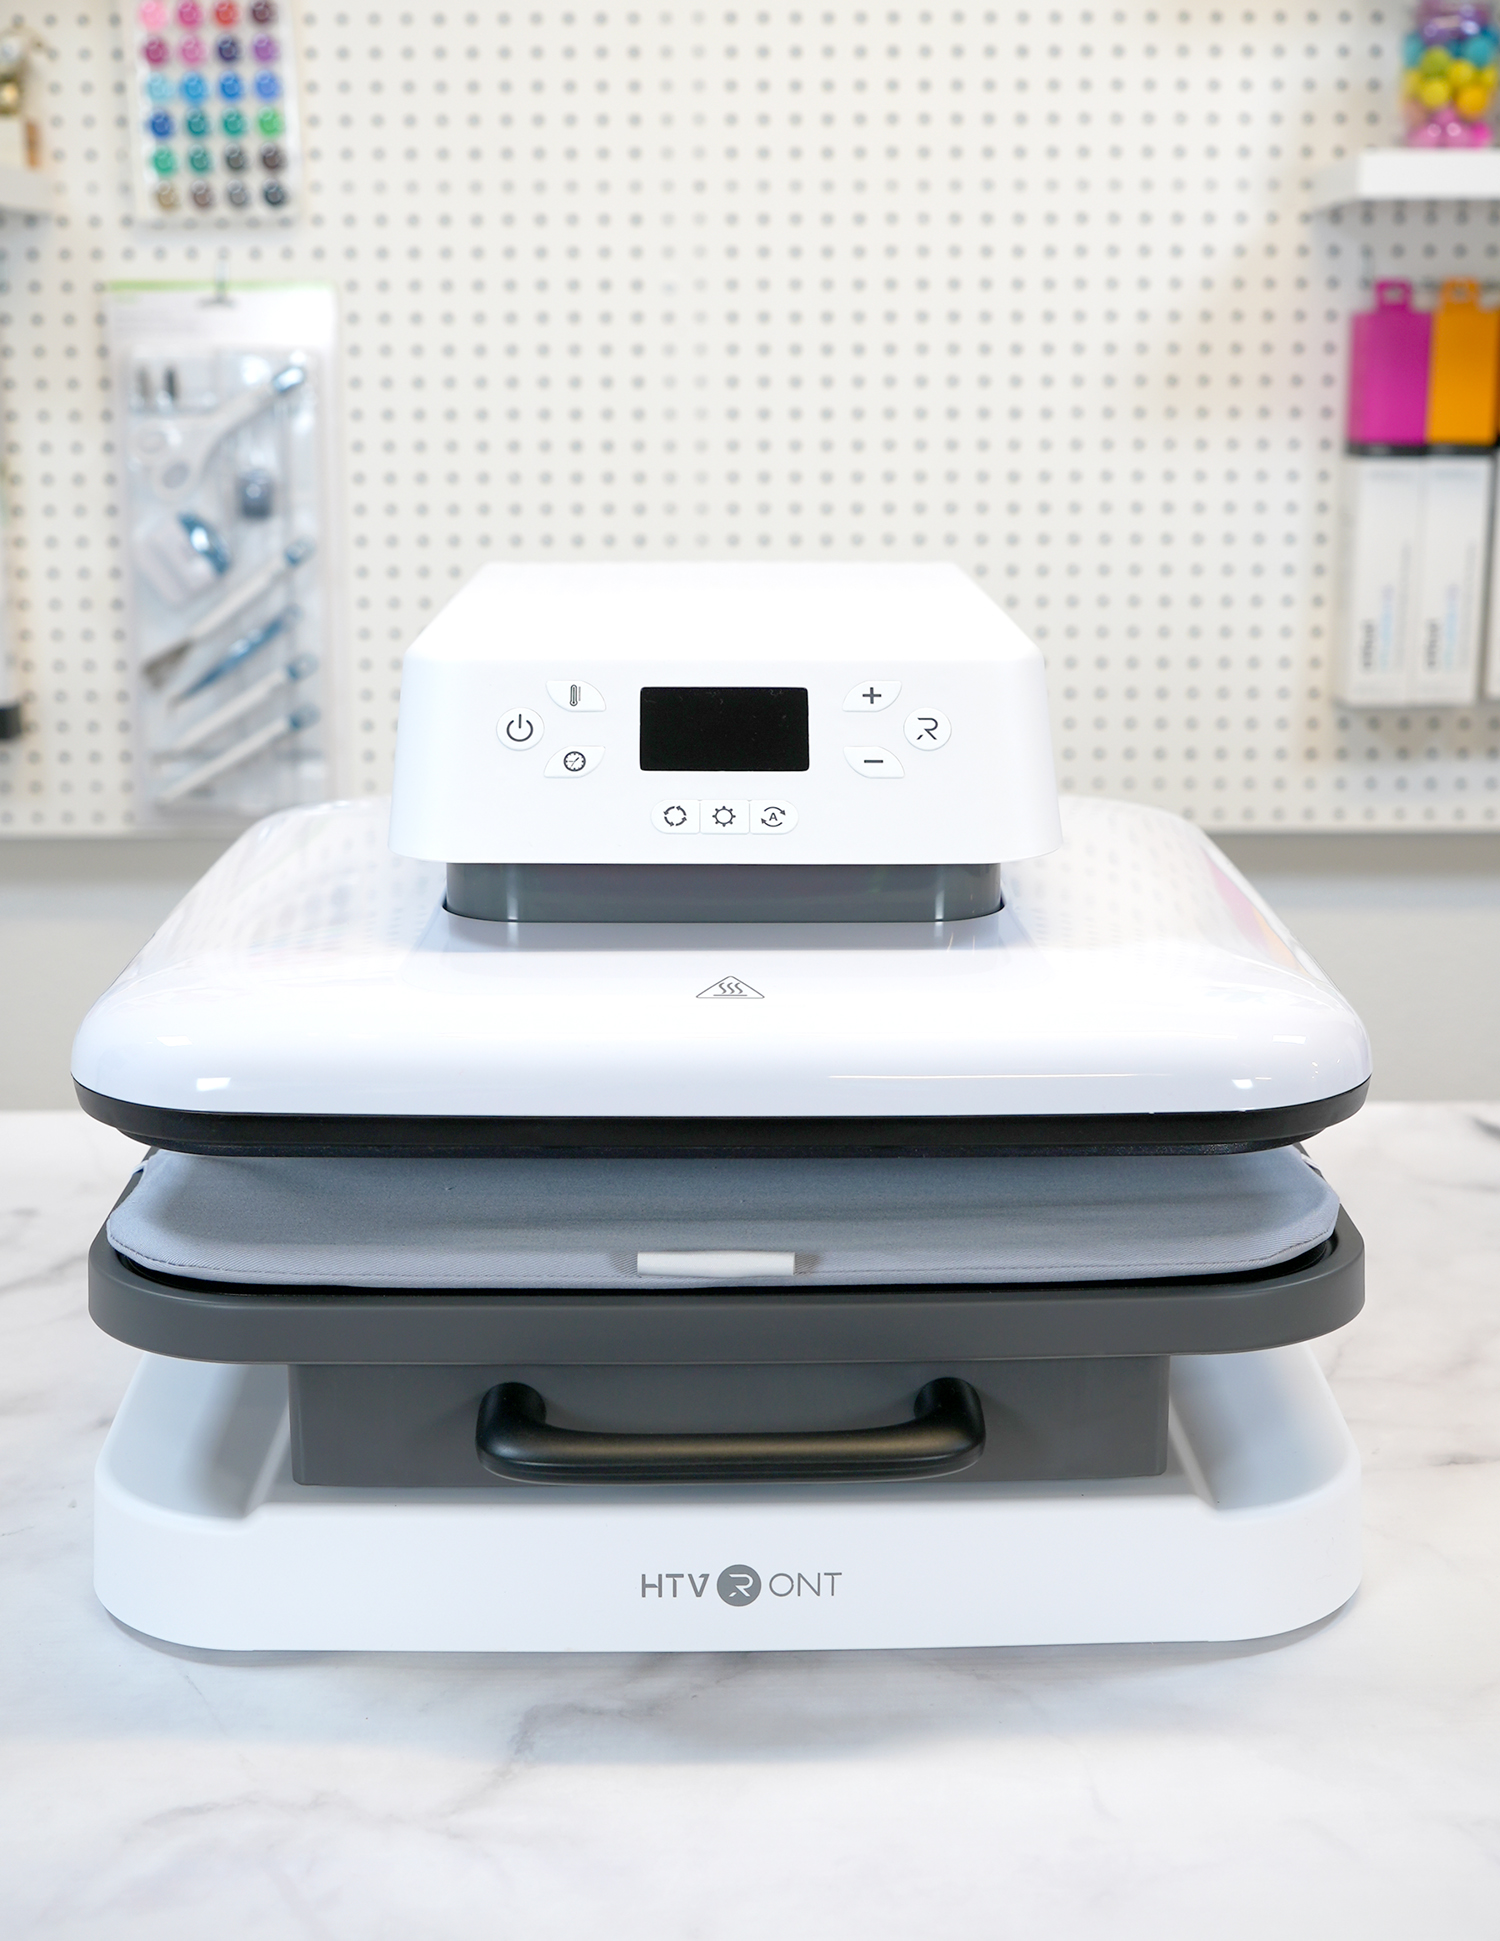 HTVRONT Auto Heat Press - Everything You Need to know (Review